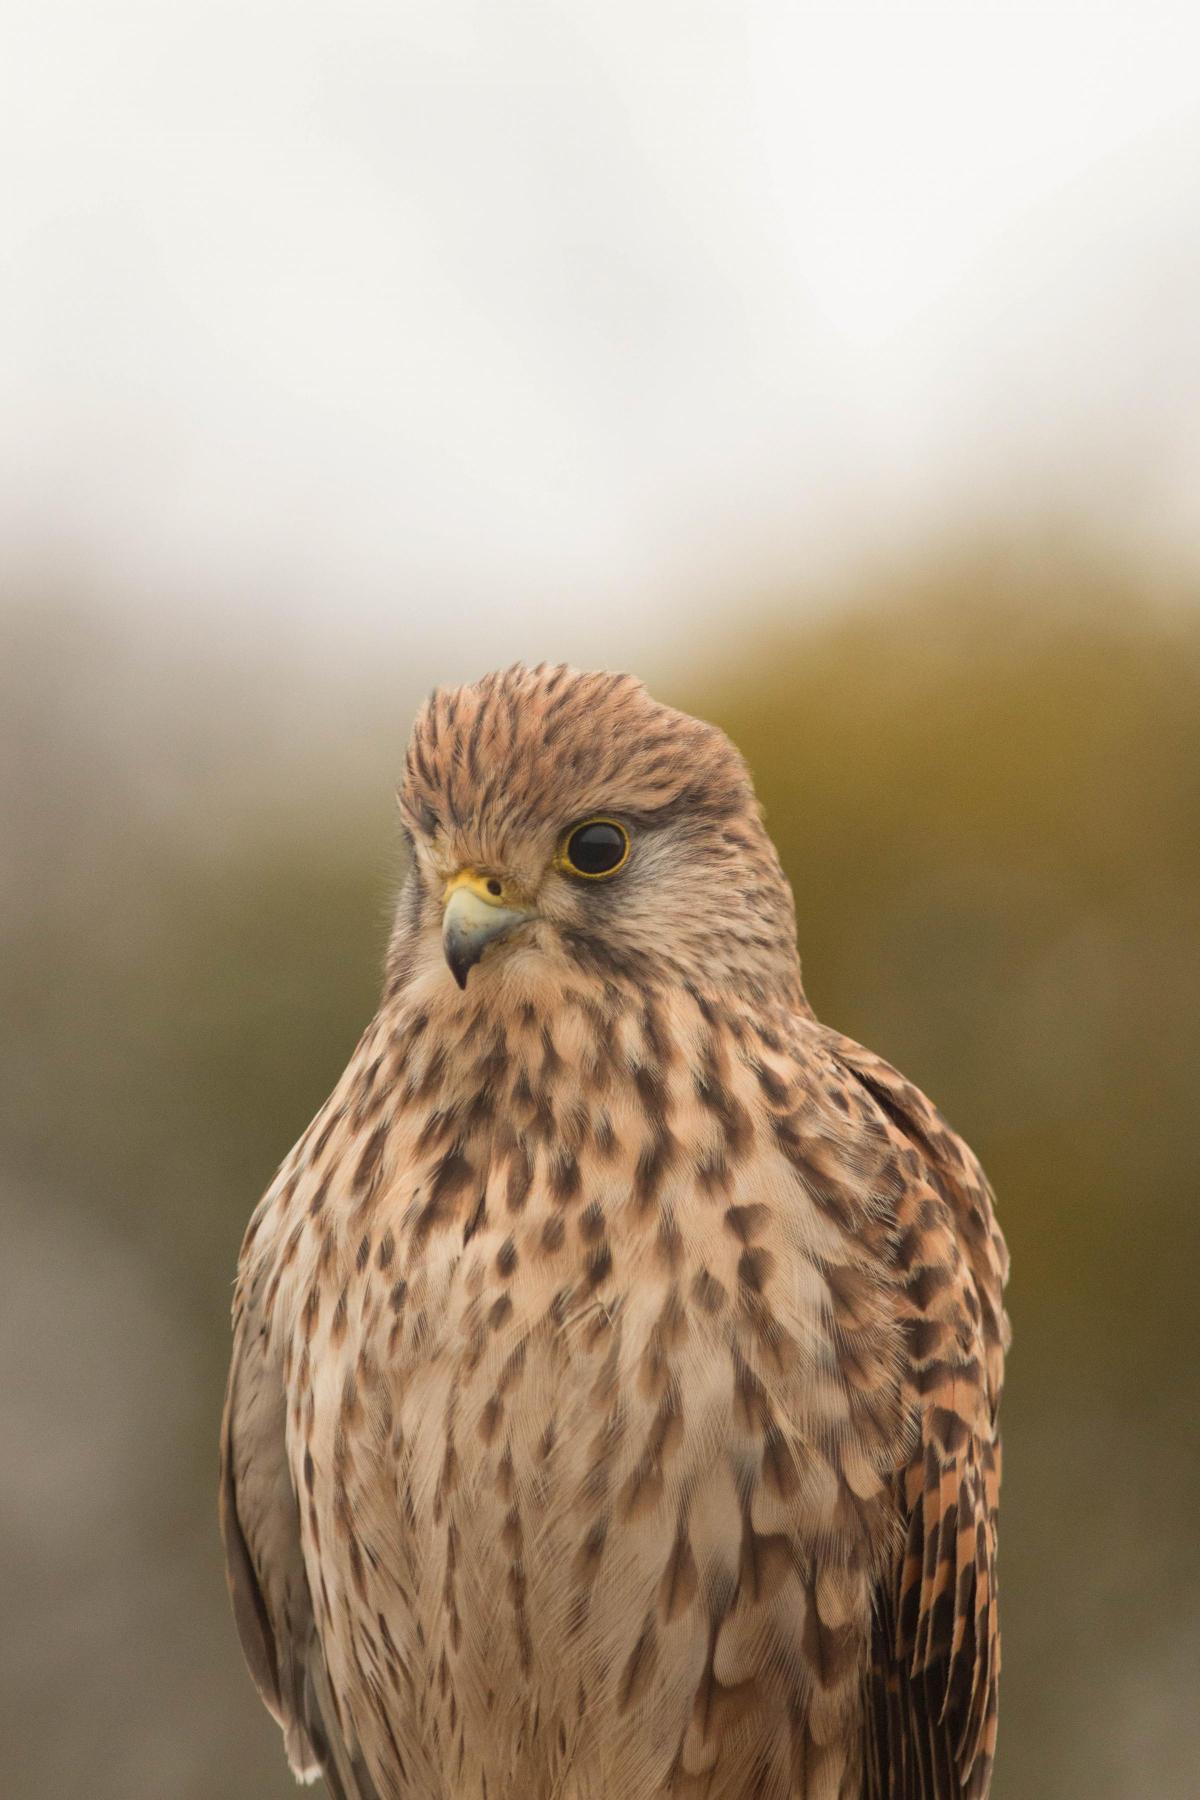 Chris Beal sent in this photo of a female kestrel in Bushy Park. He said: "It took me around two hours to get the shot I liked. So my patience paid off."